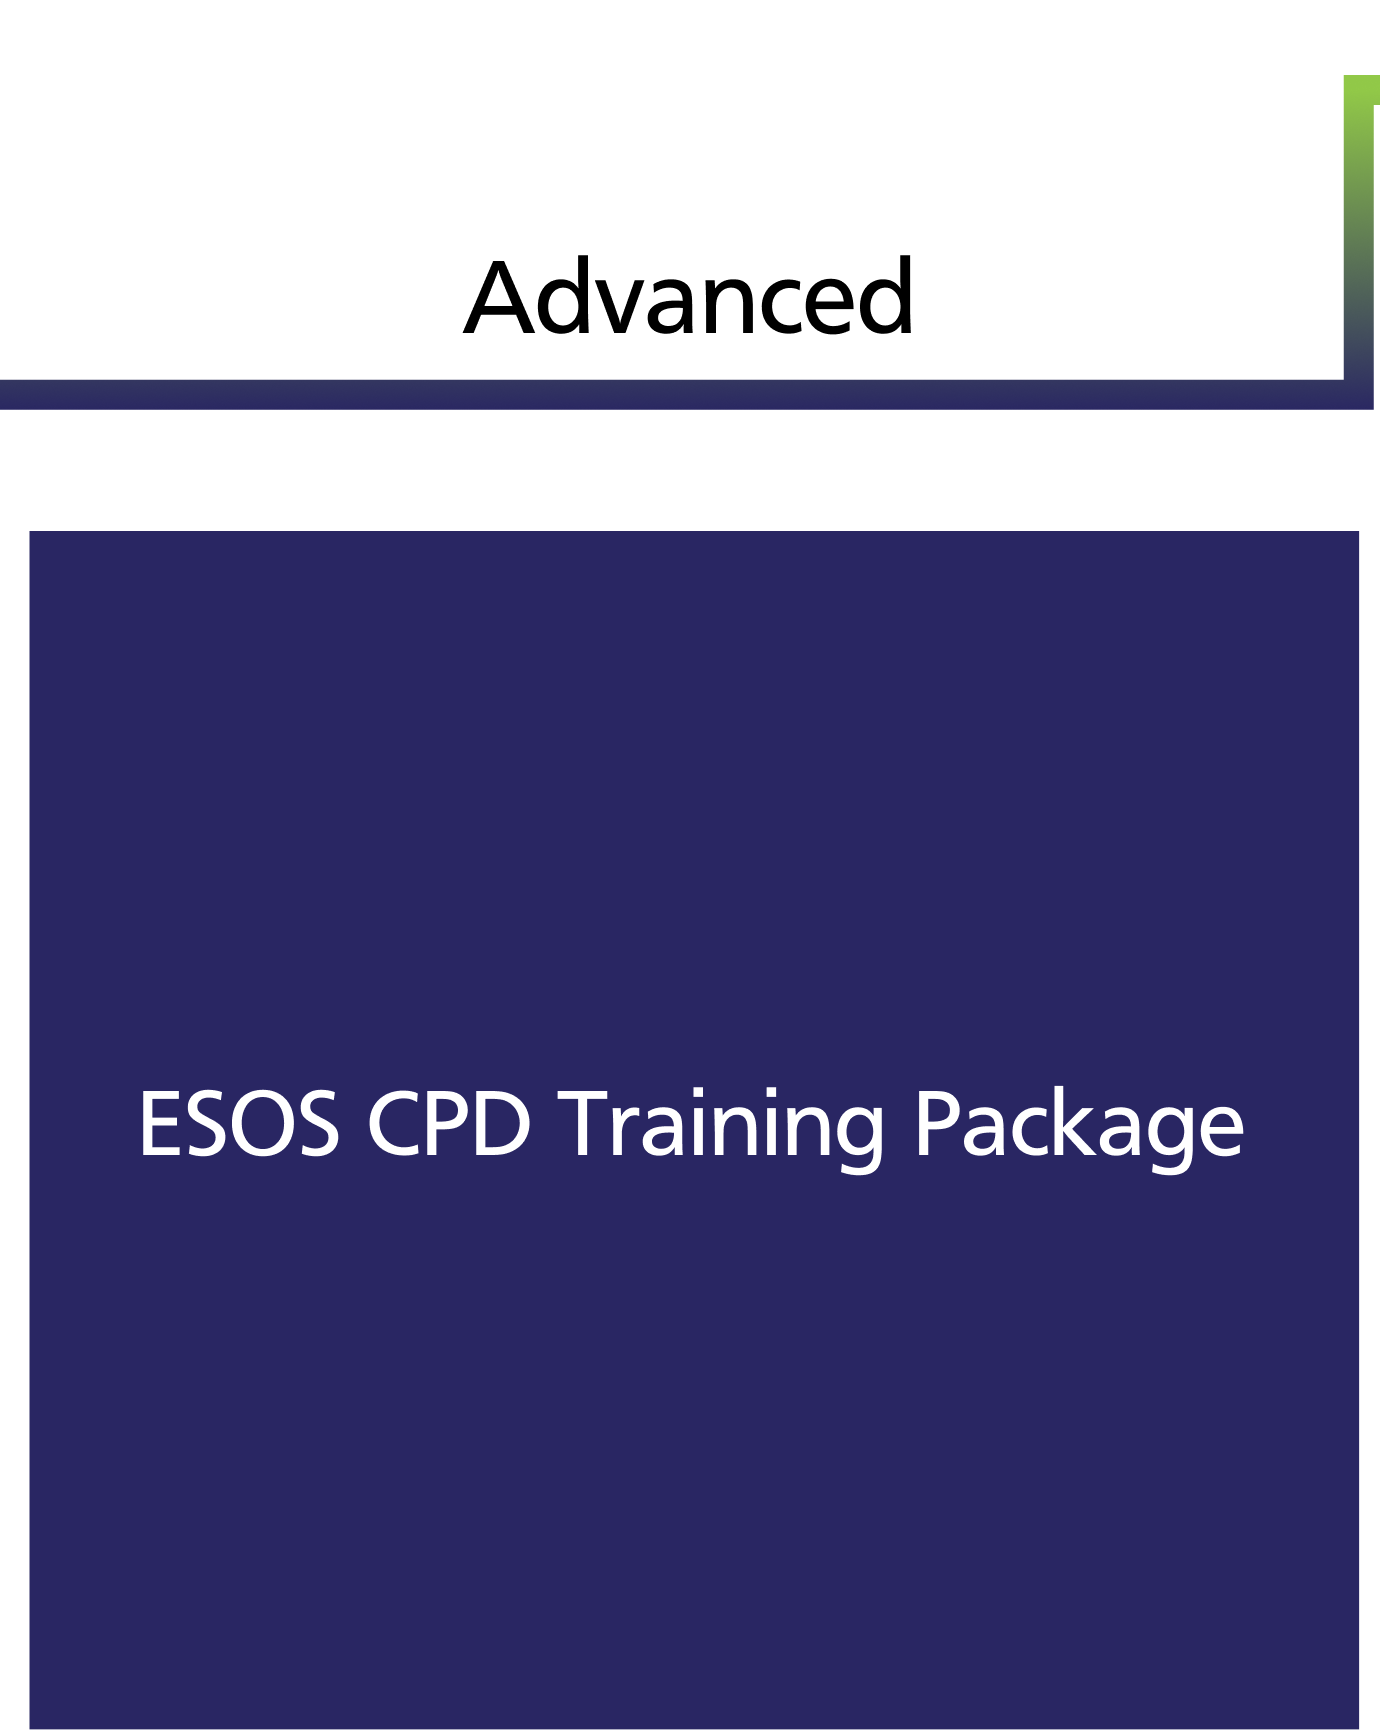 ESOS CPD Training Package